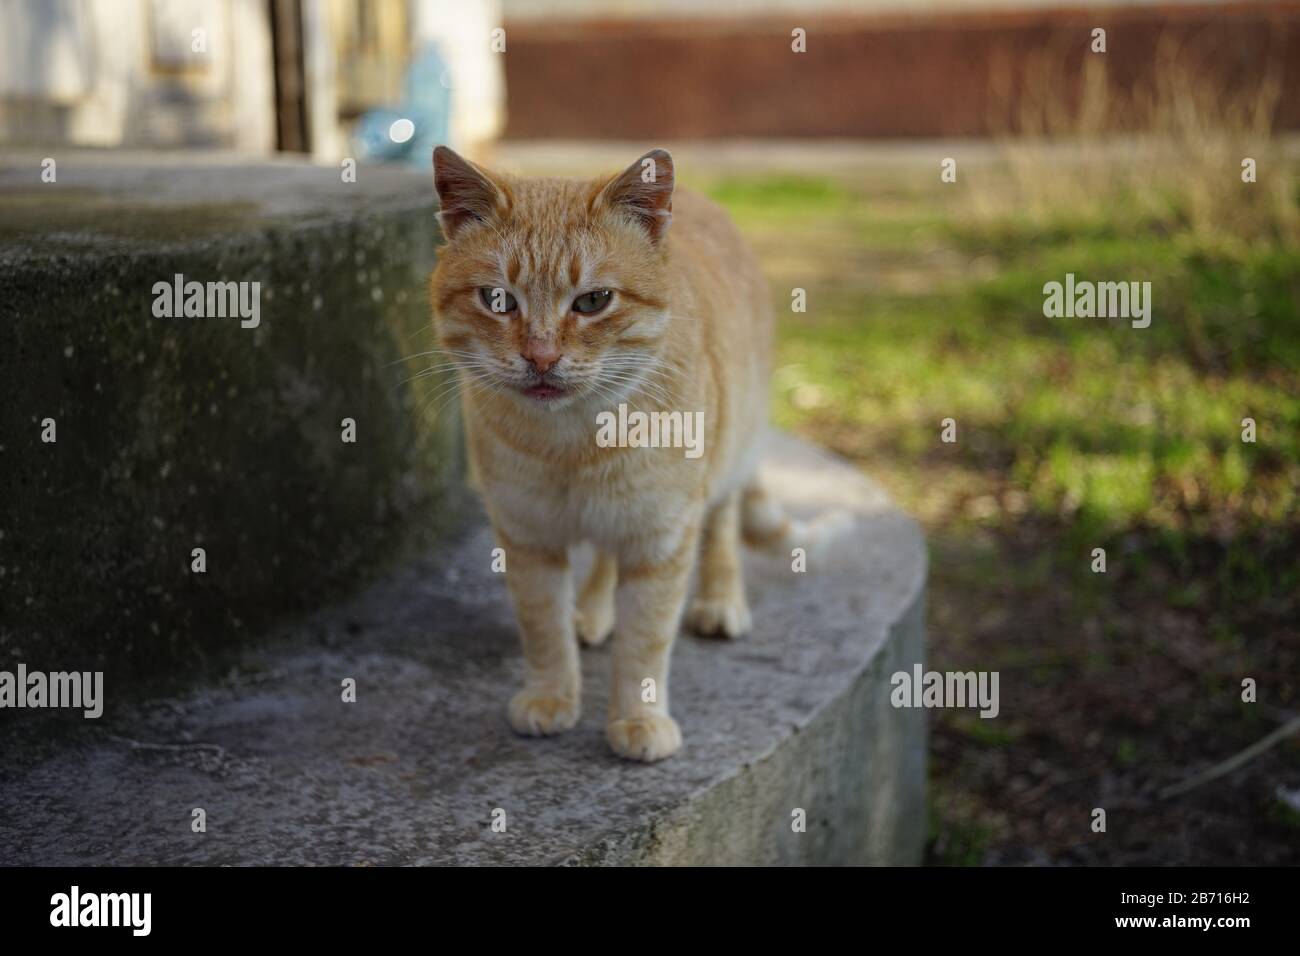 Lovely ginger cat walk in a sunny garden at stone steps. Stock Photo